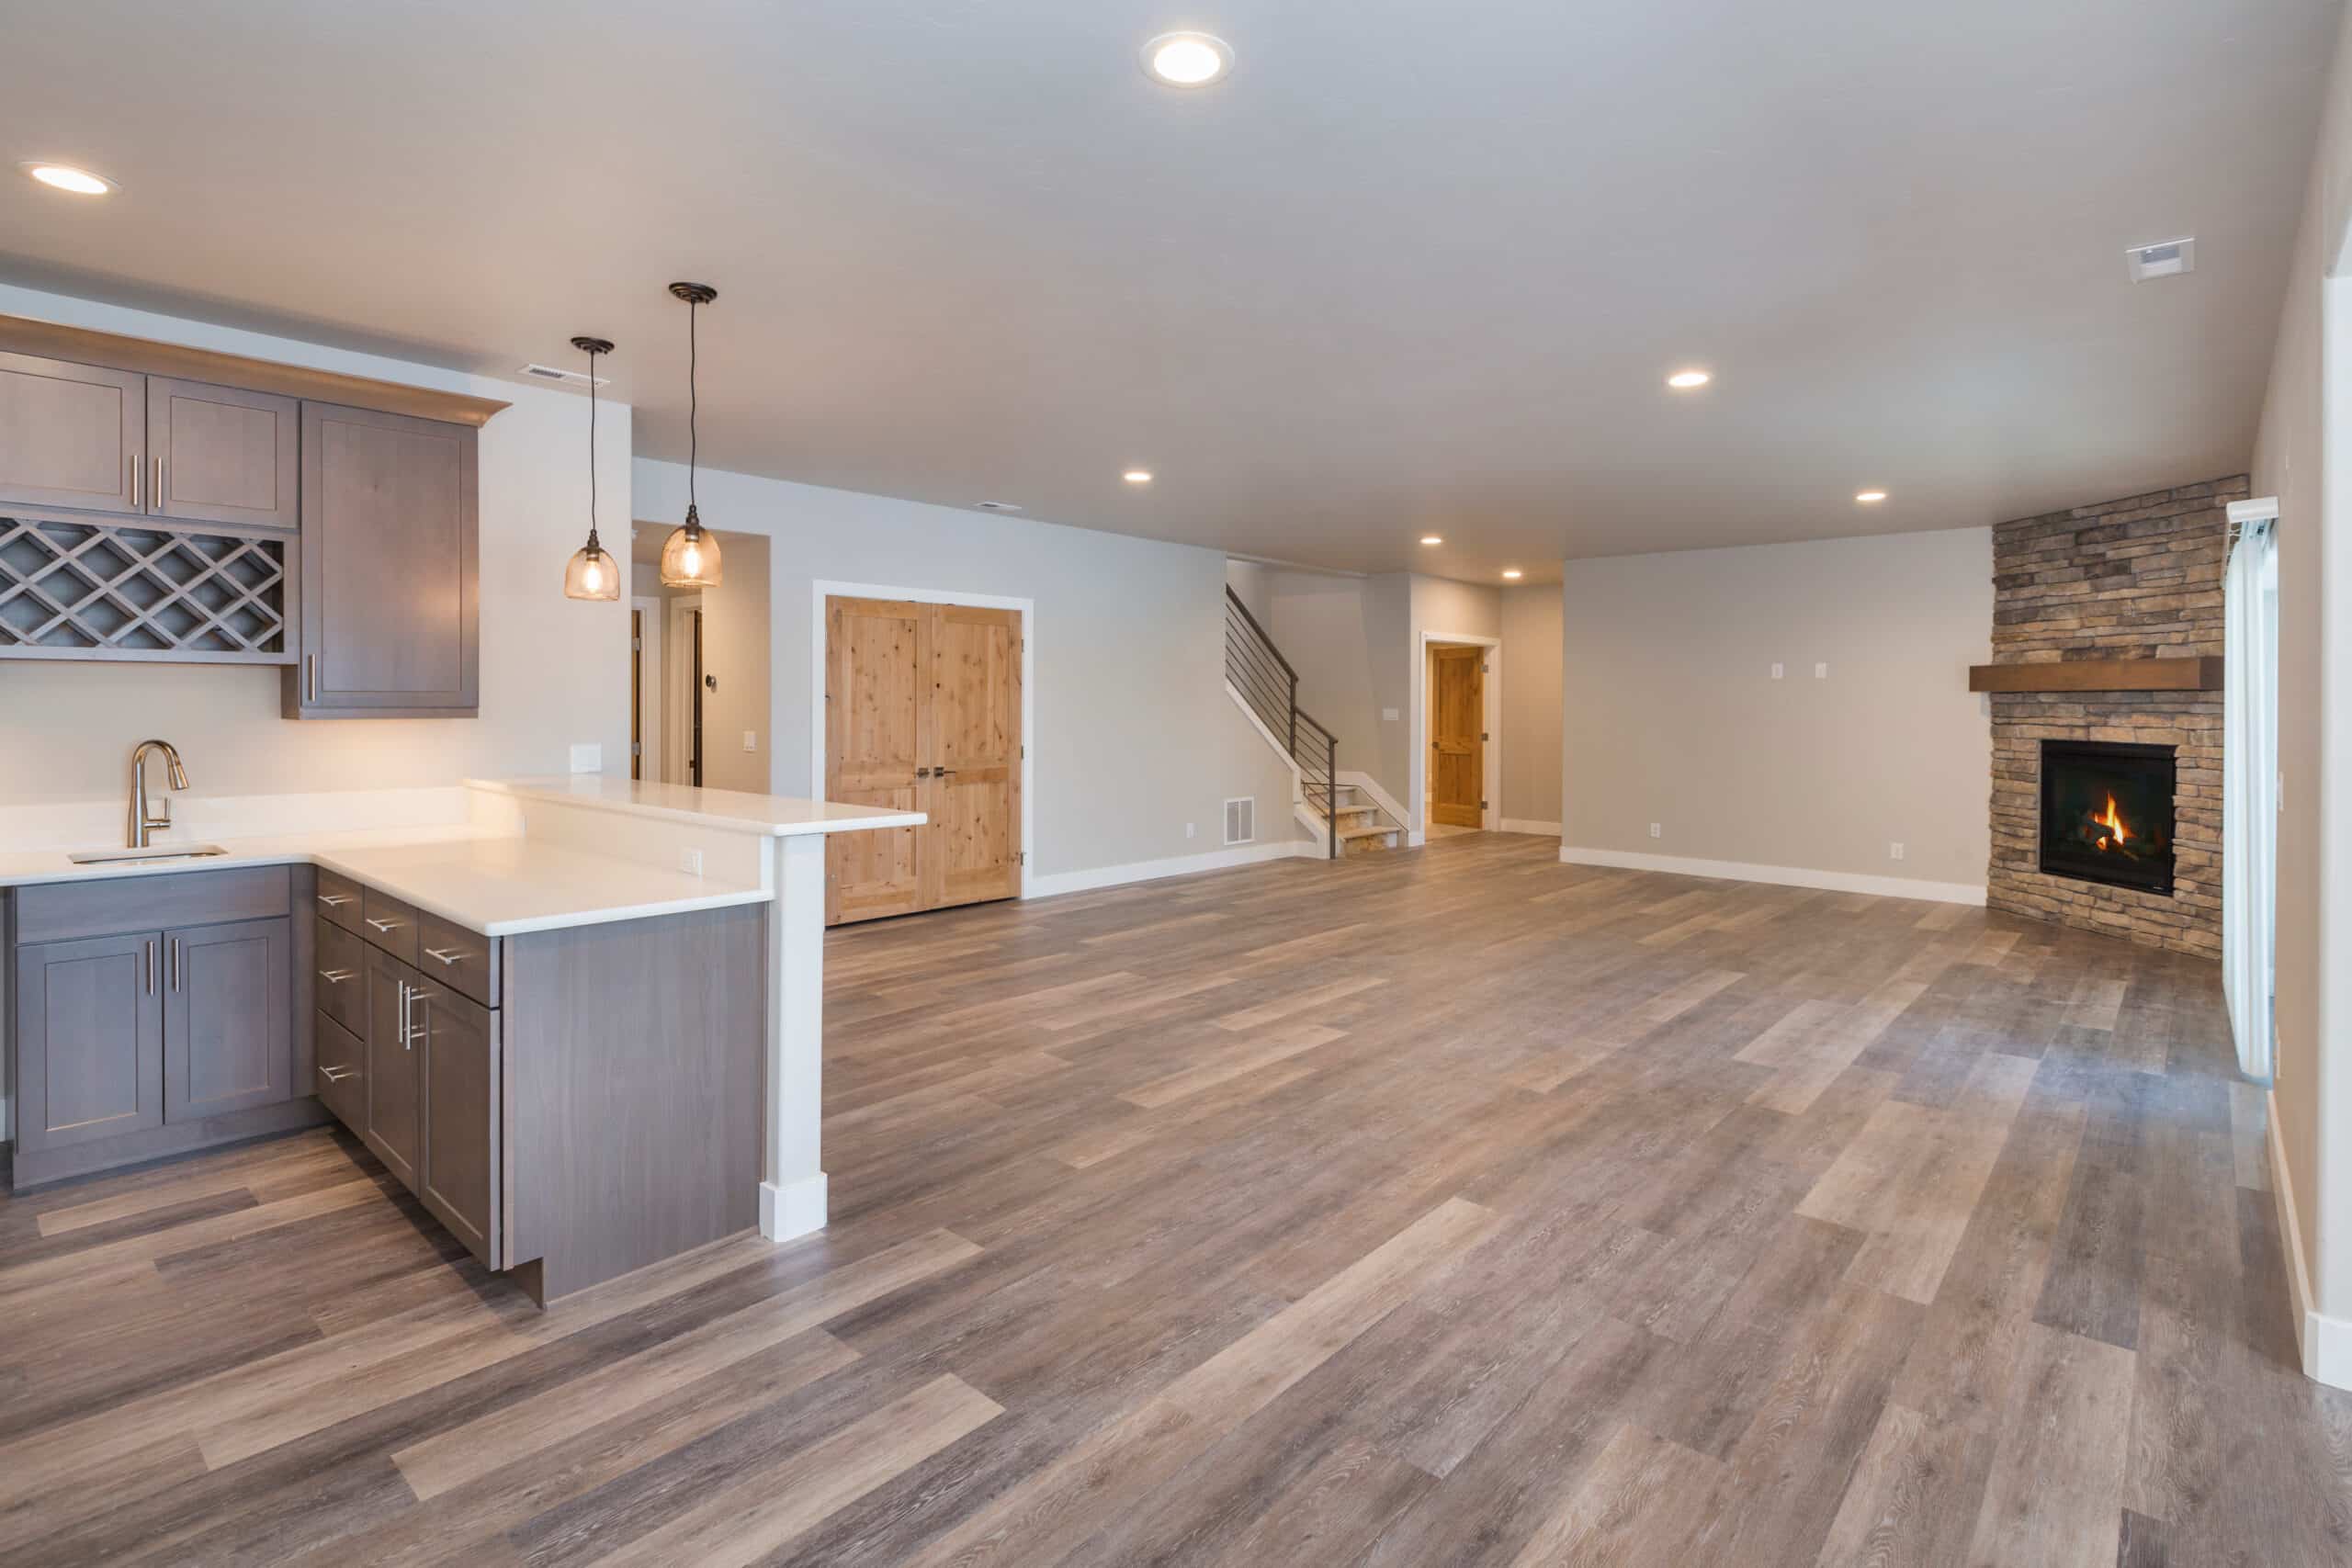 Spacious basement with fireplace, open kitchen in wooden flooring and light grey walls